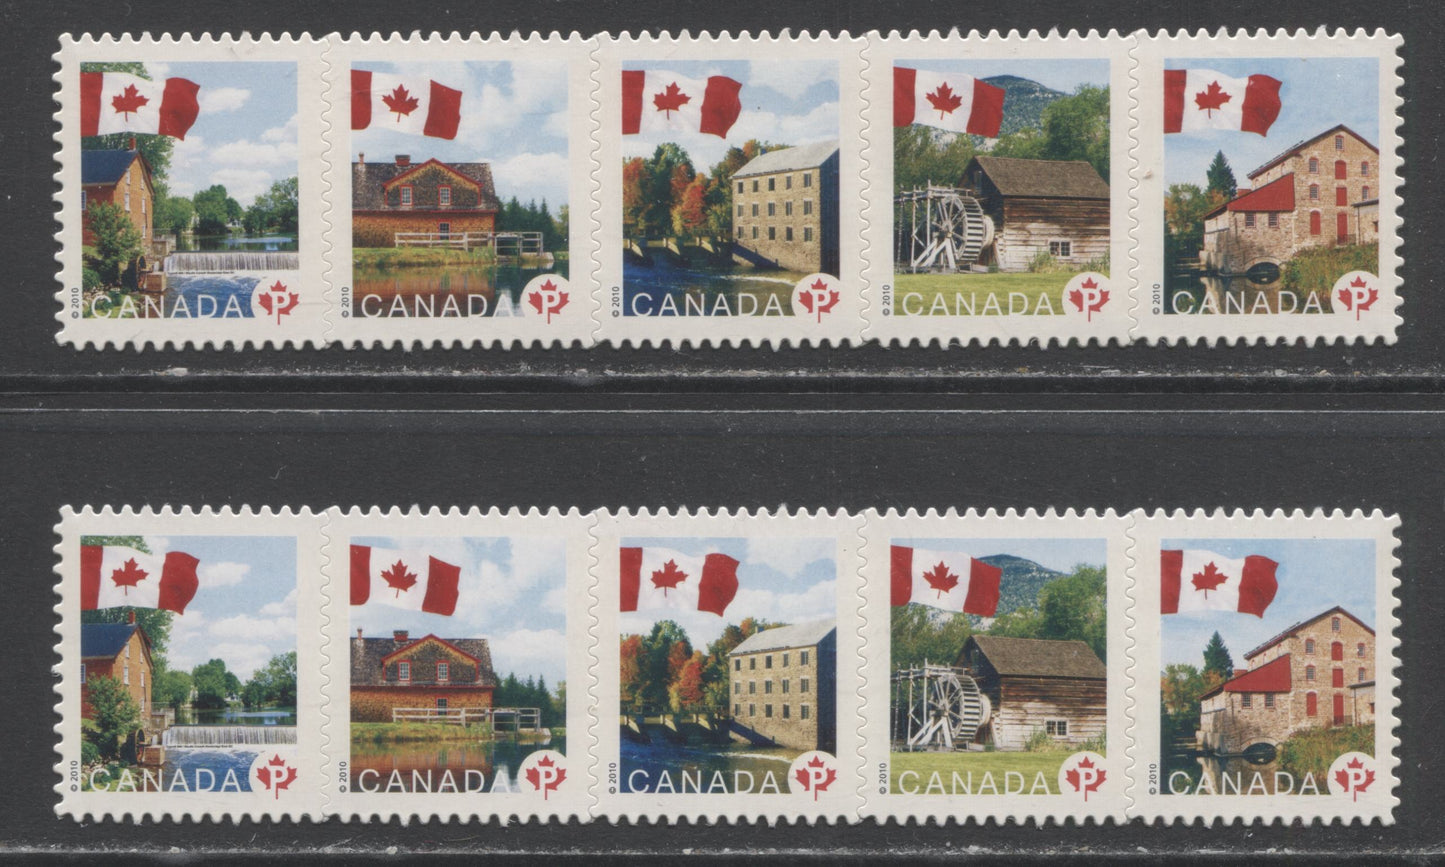 Lot 109 Canada #2355i P(57c) Multicolored Flags Over Mills, 2010 Permanents, 2 VFNH Strips Of 5, Die Cut To Shape On HF & HB Backing Papers